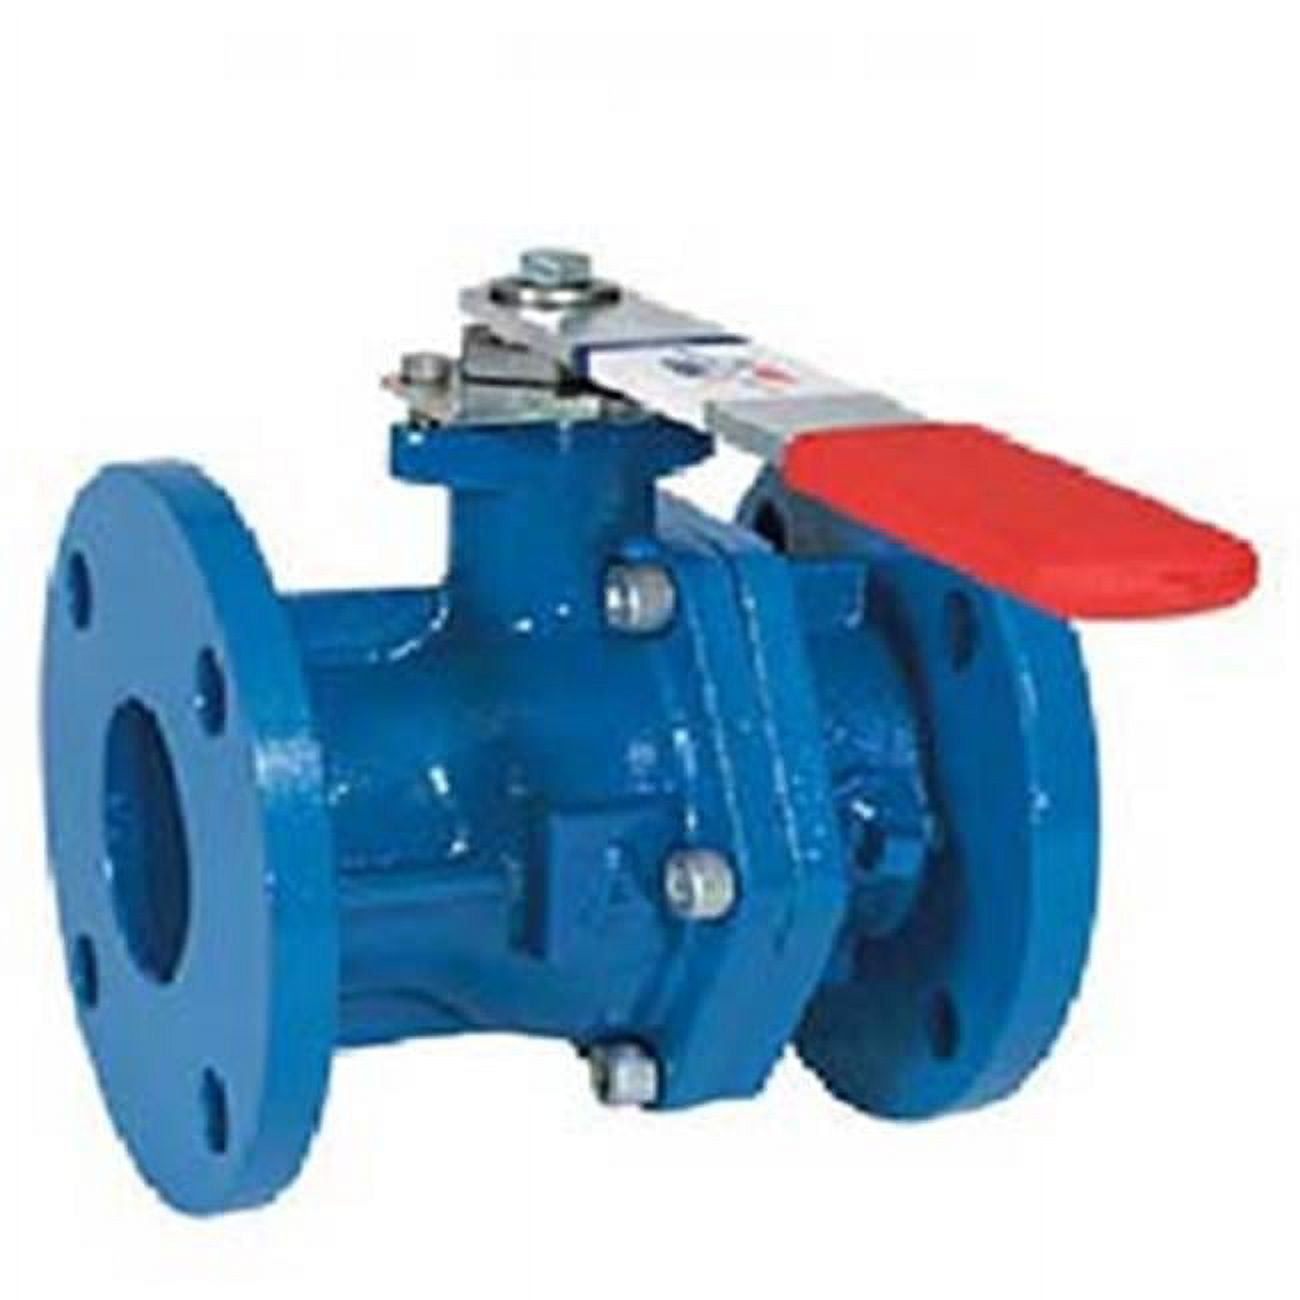 Picture of American Valve 3700V 2 2 in. Cast Iron Grooved Ball Valve